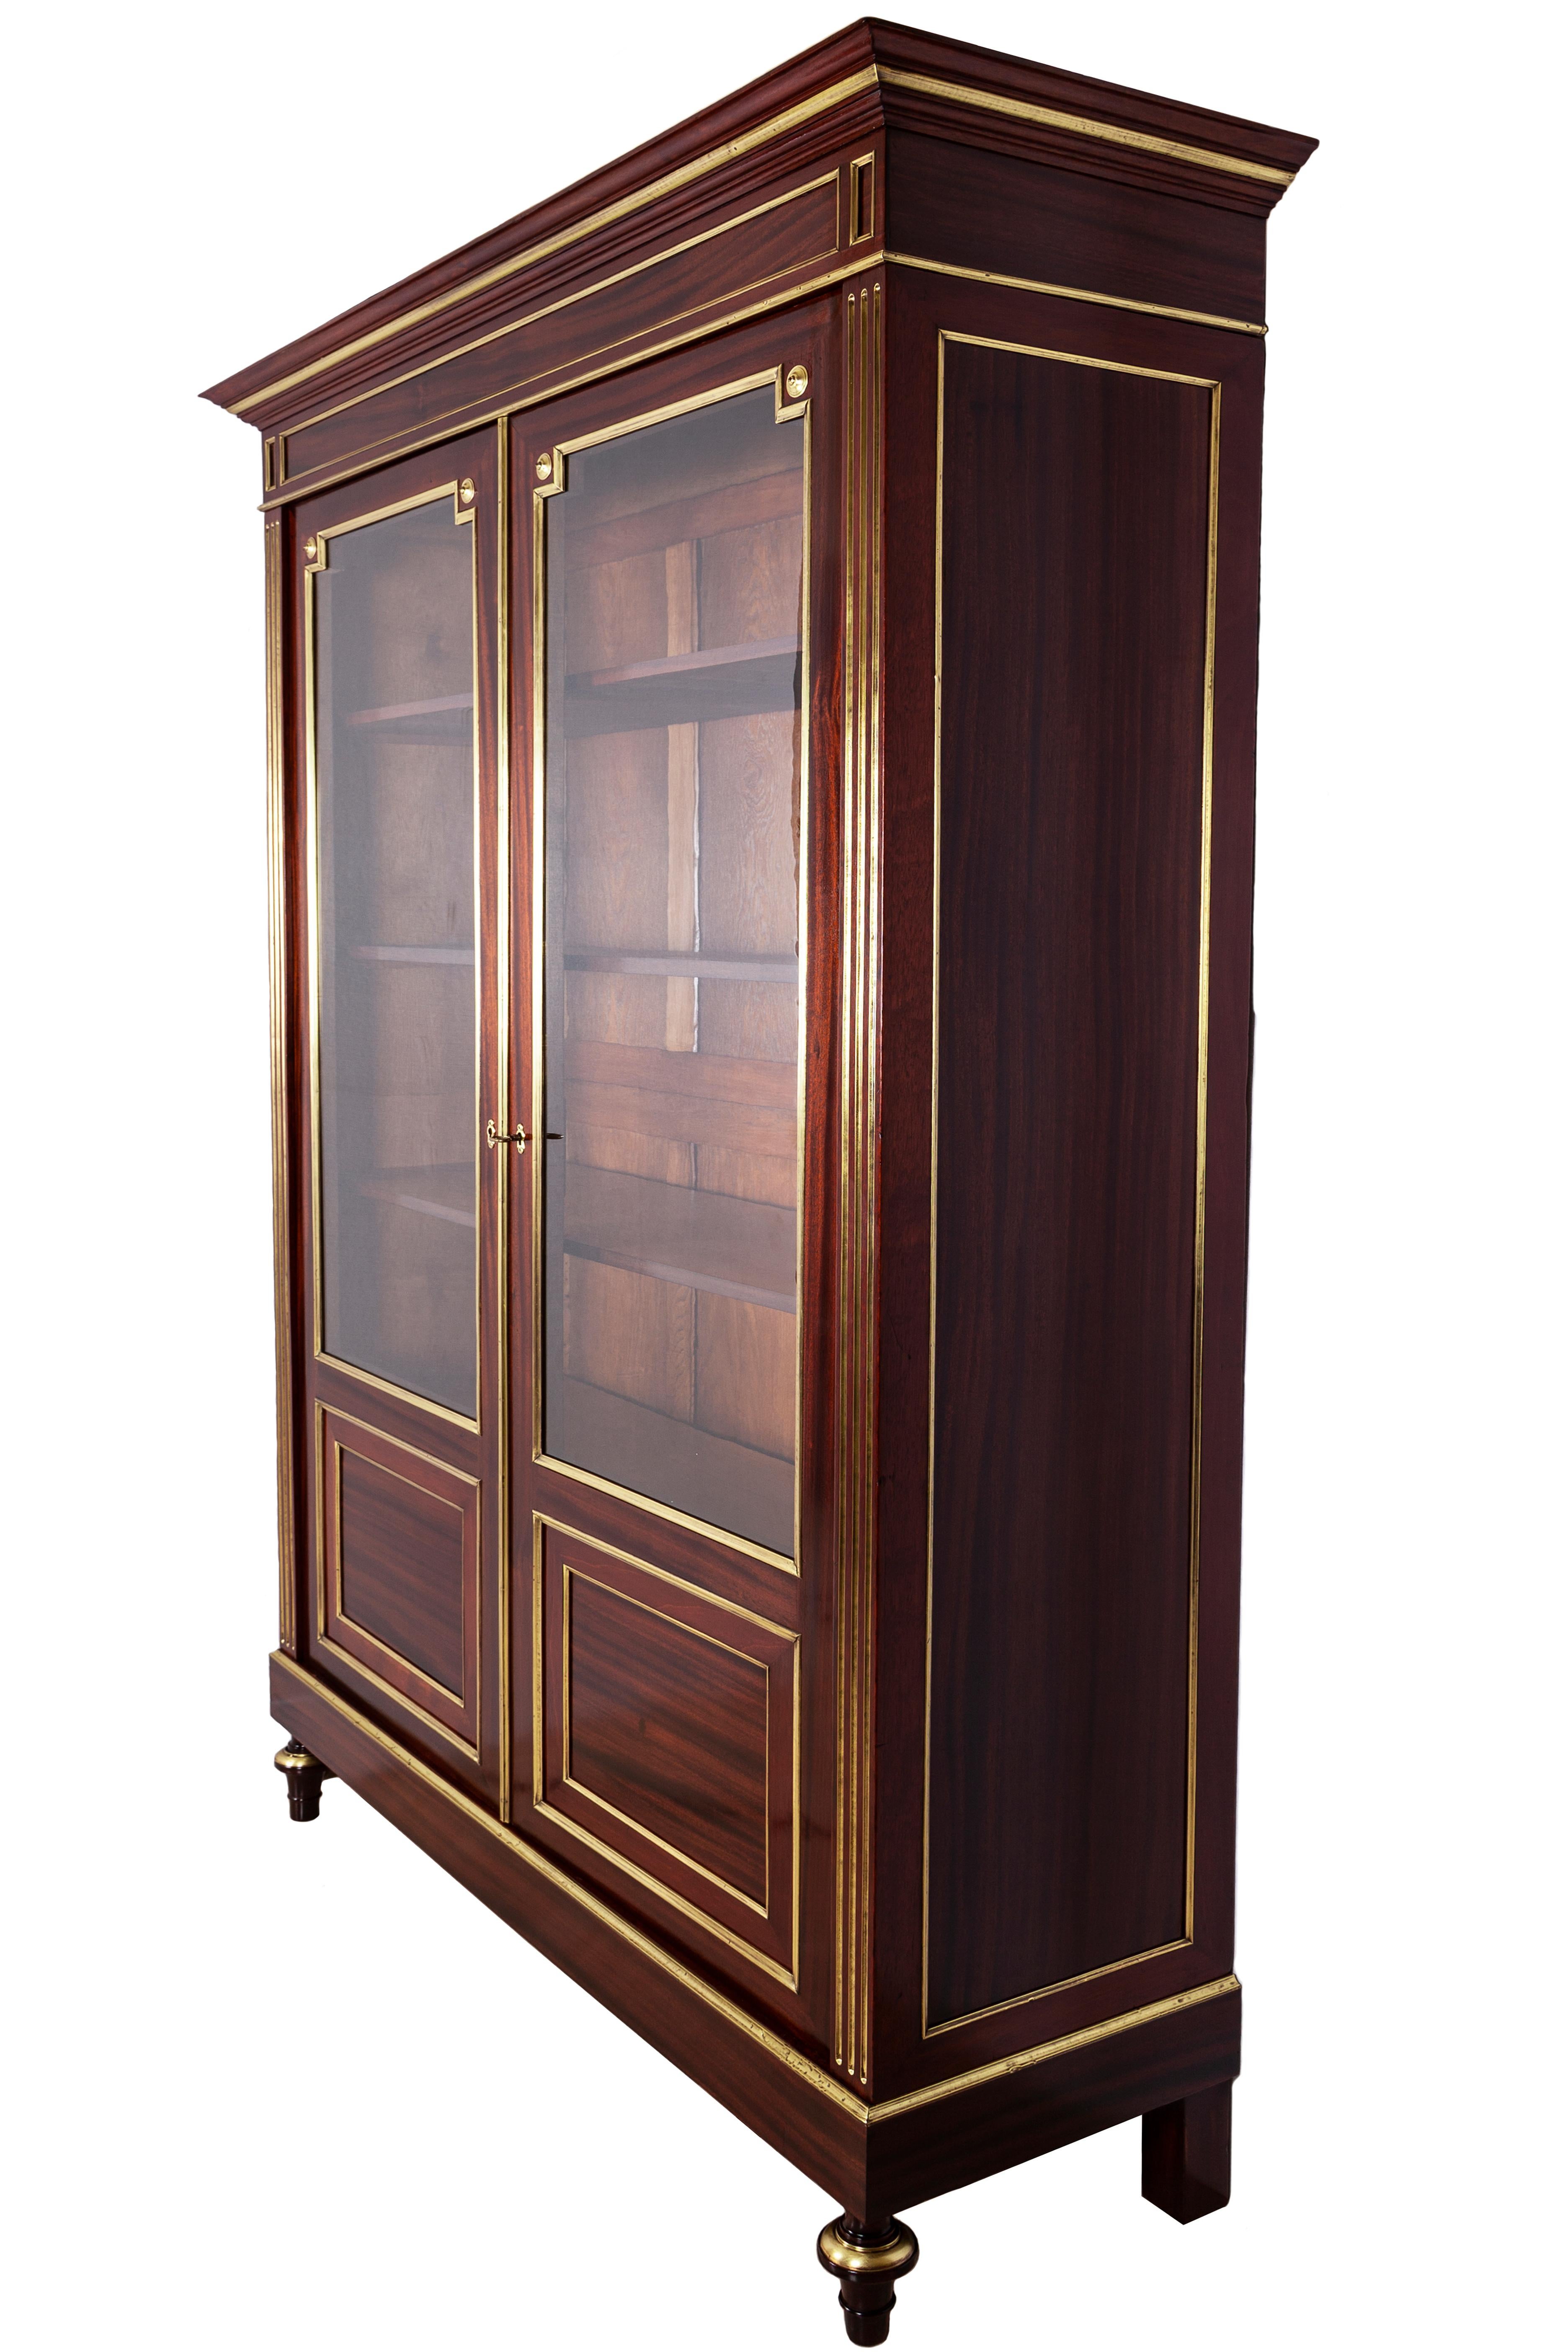 A very fine second Empire bookcase or display cabinet in mahogany. It has two doors with the original glass.
This beautiful bookcase is embellished with frames and moldings in brass sheet.
On the inside, it is composed by four adjustable shelves.